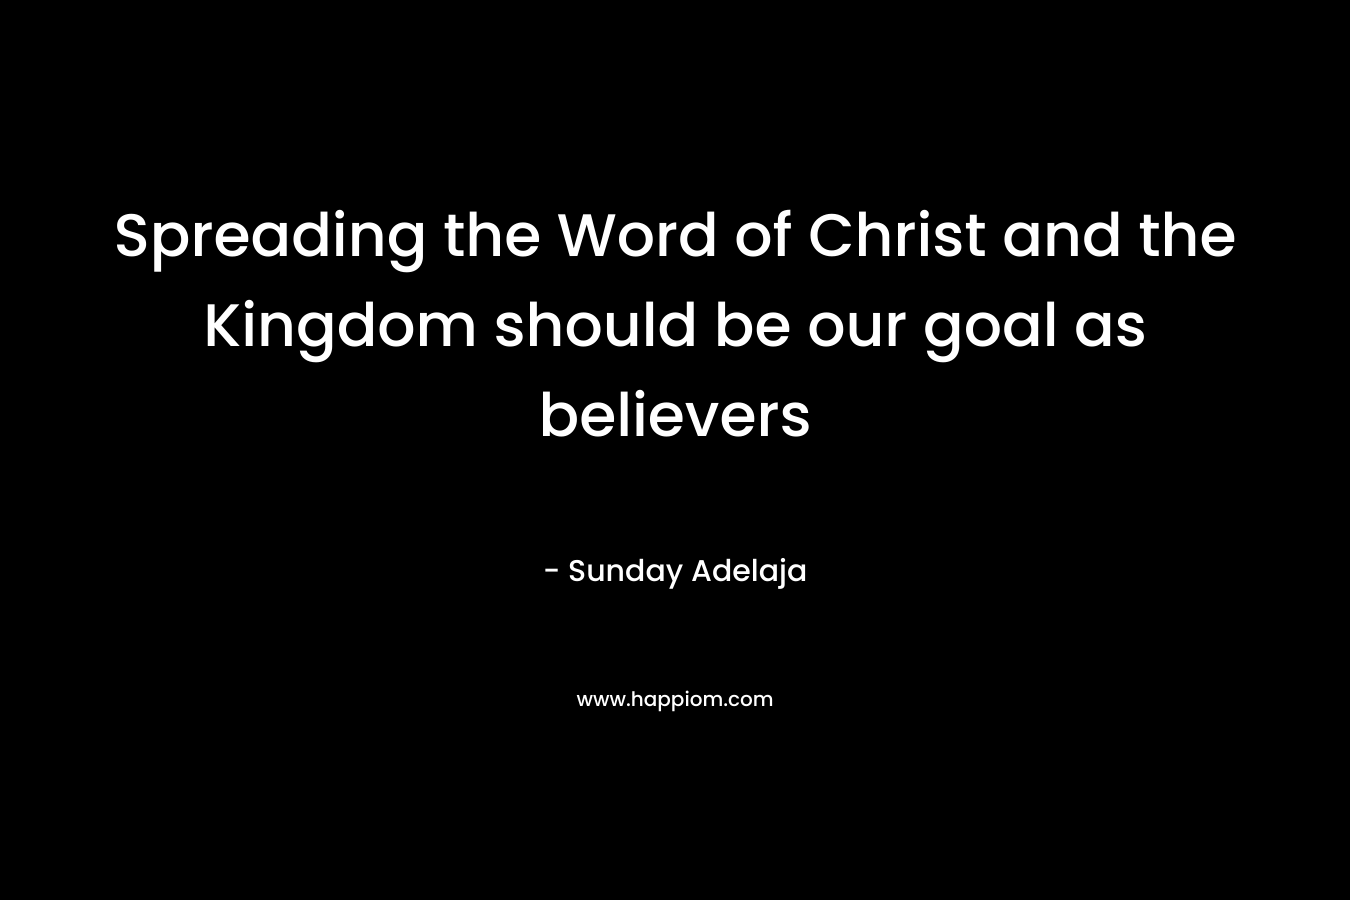 Spreading the Word of Christ and the Kingdom should be our goal as believers